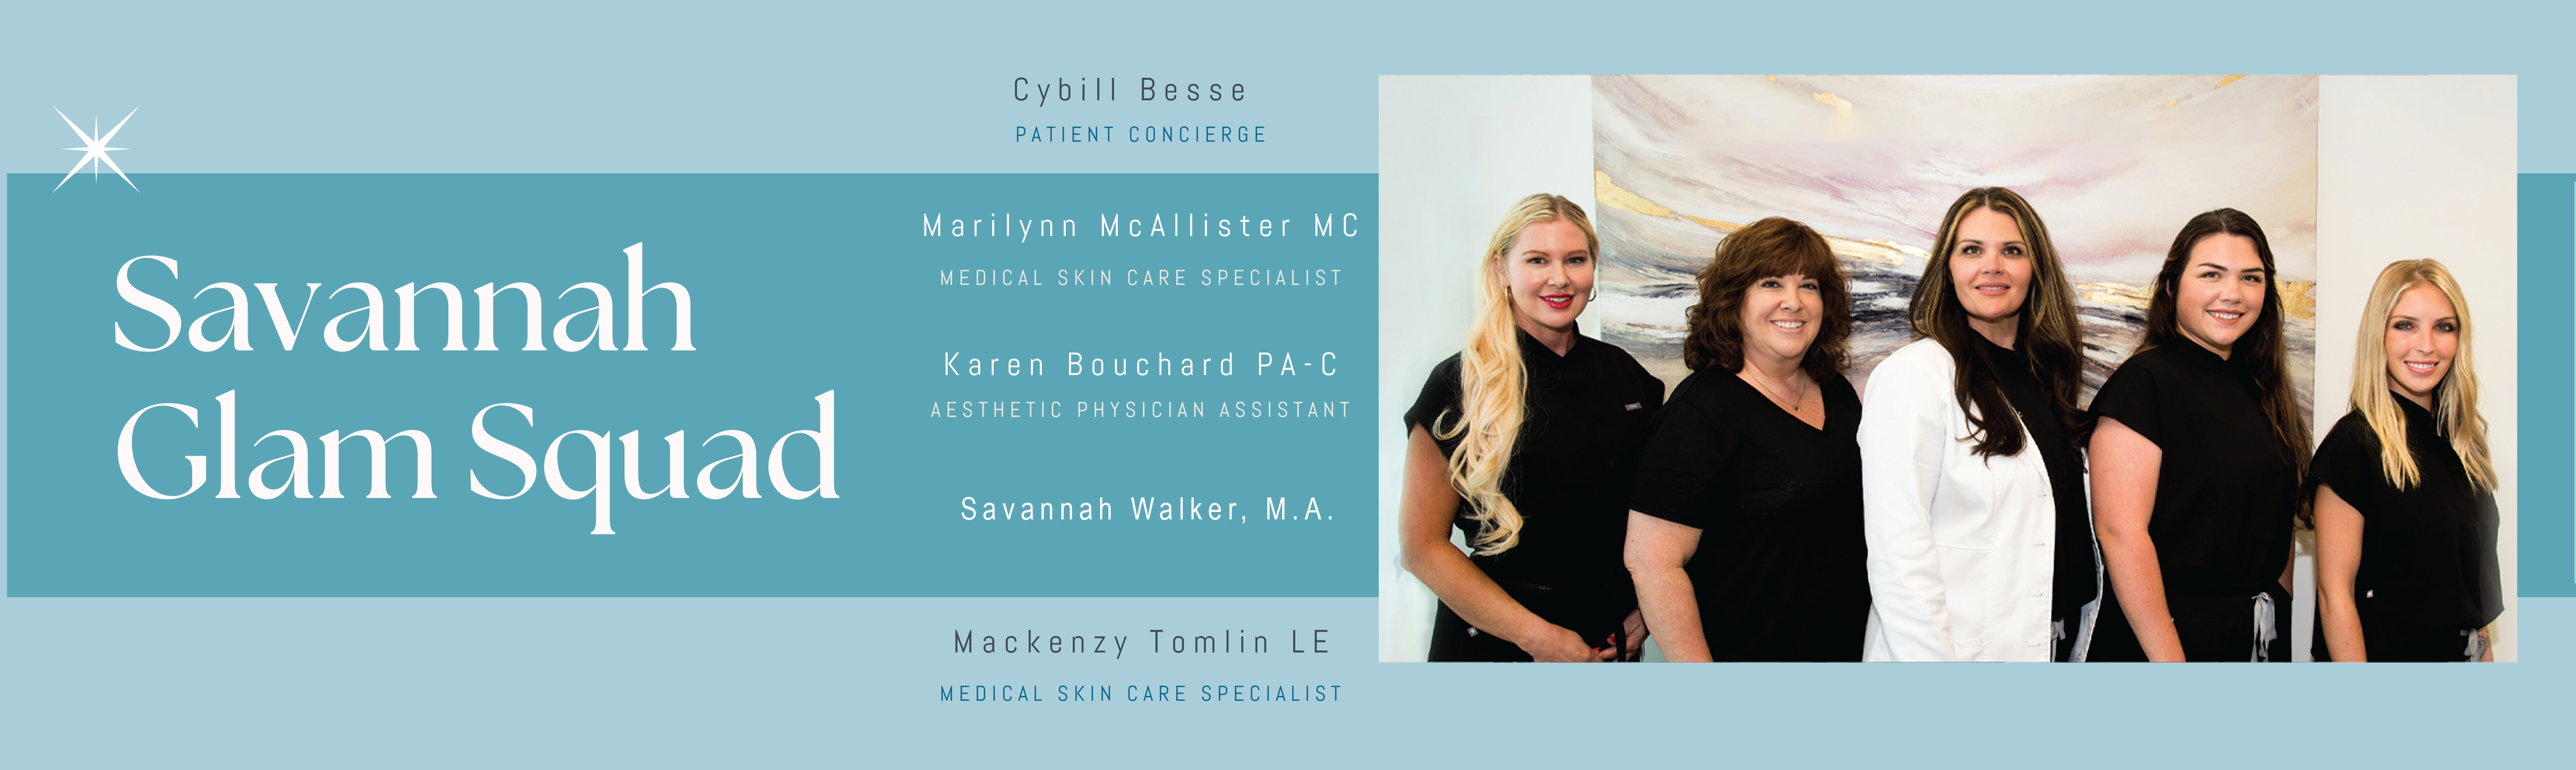 Aesthetic Services at the Skin Institute and Laser Center in Savannah, GA